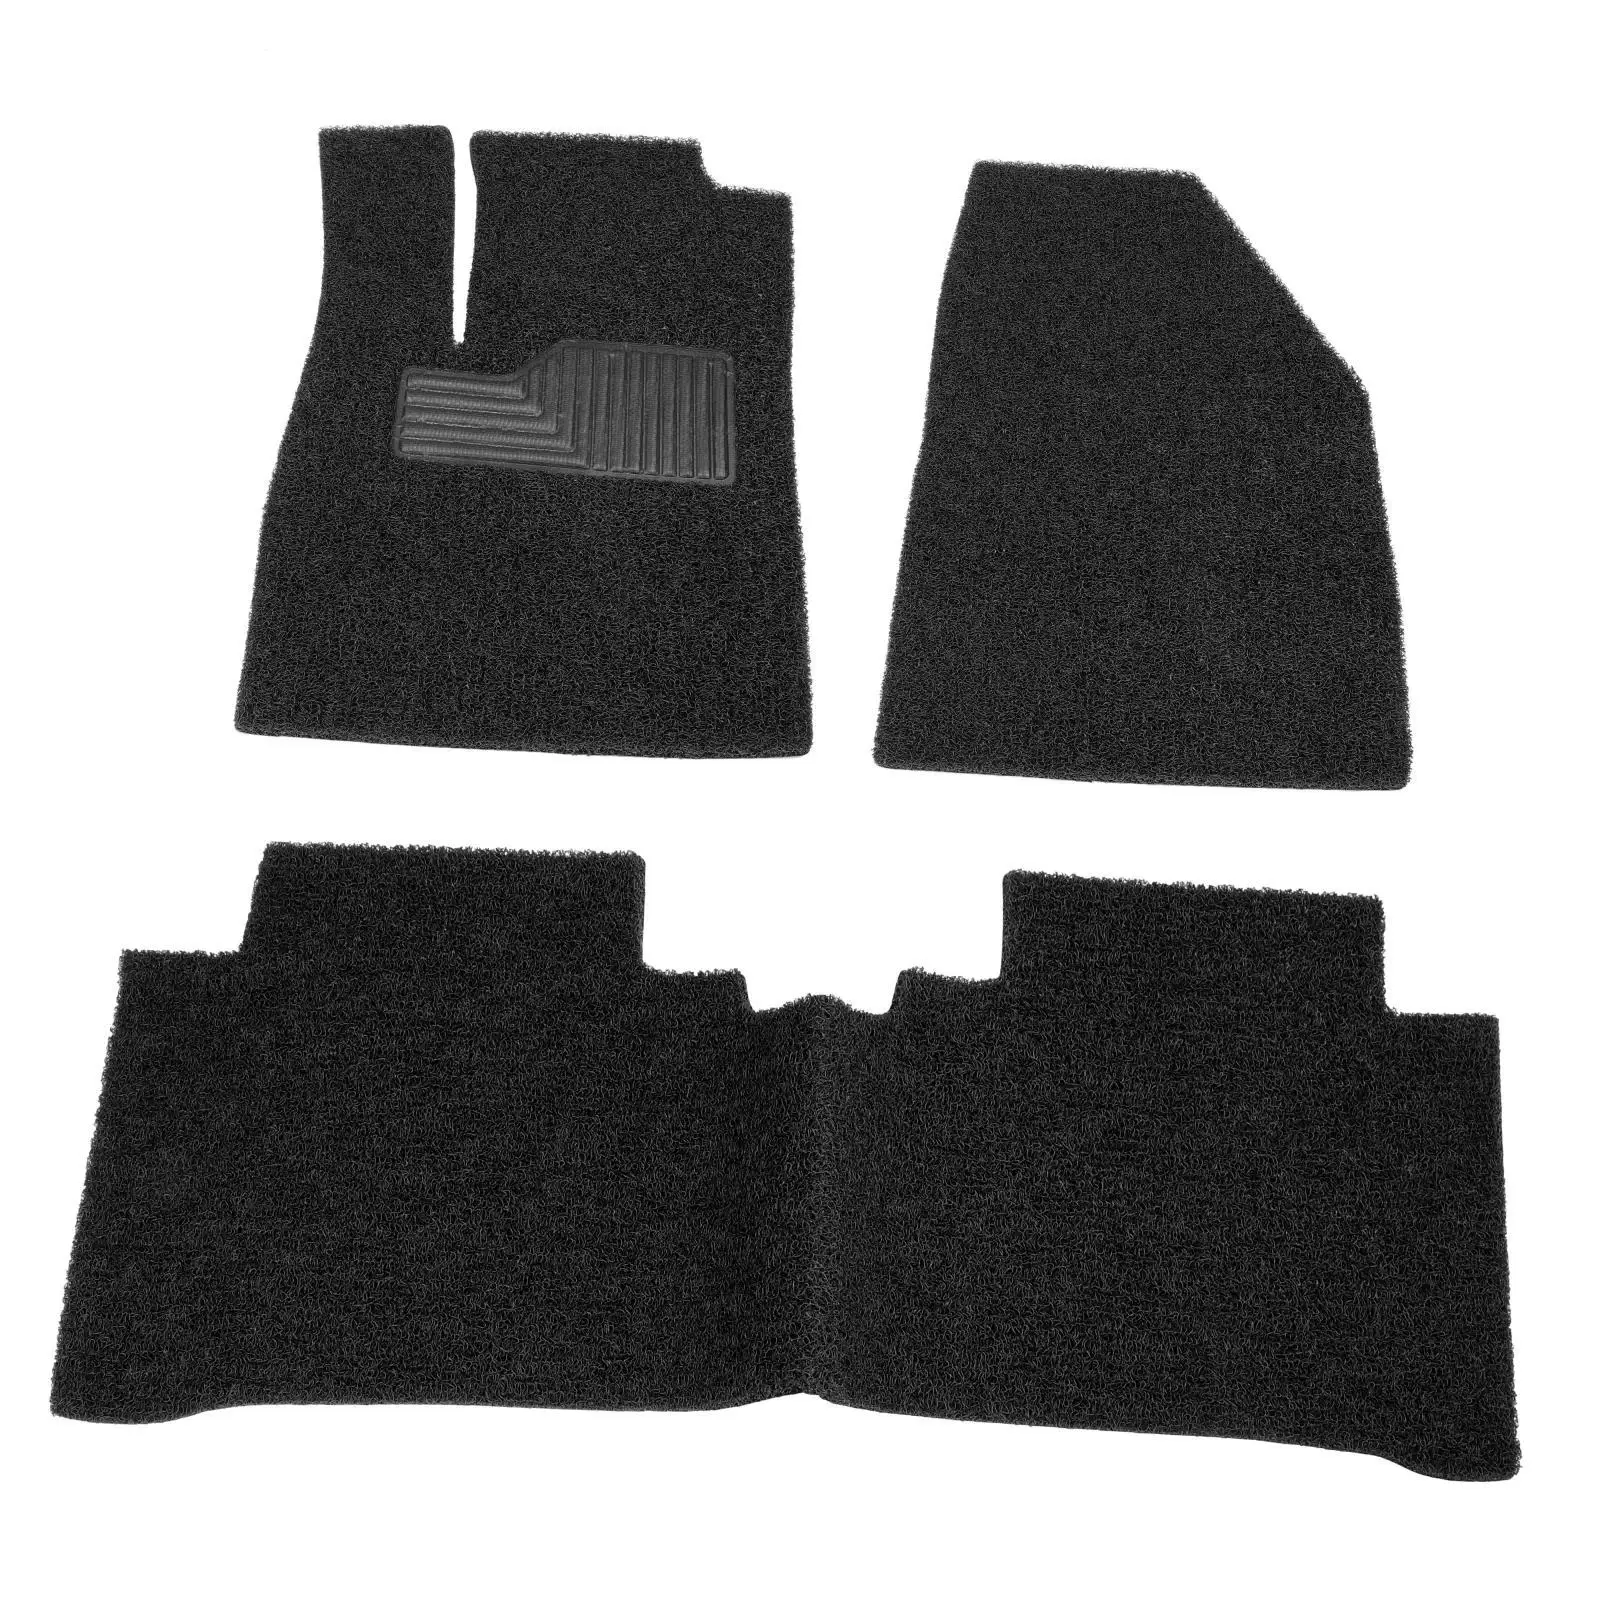 3x Automotive Floor Mats Professional Wear Resistant Practical High Toughness Portable PVC for Byd Yuan Plus Atto 3 21-23